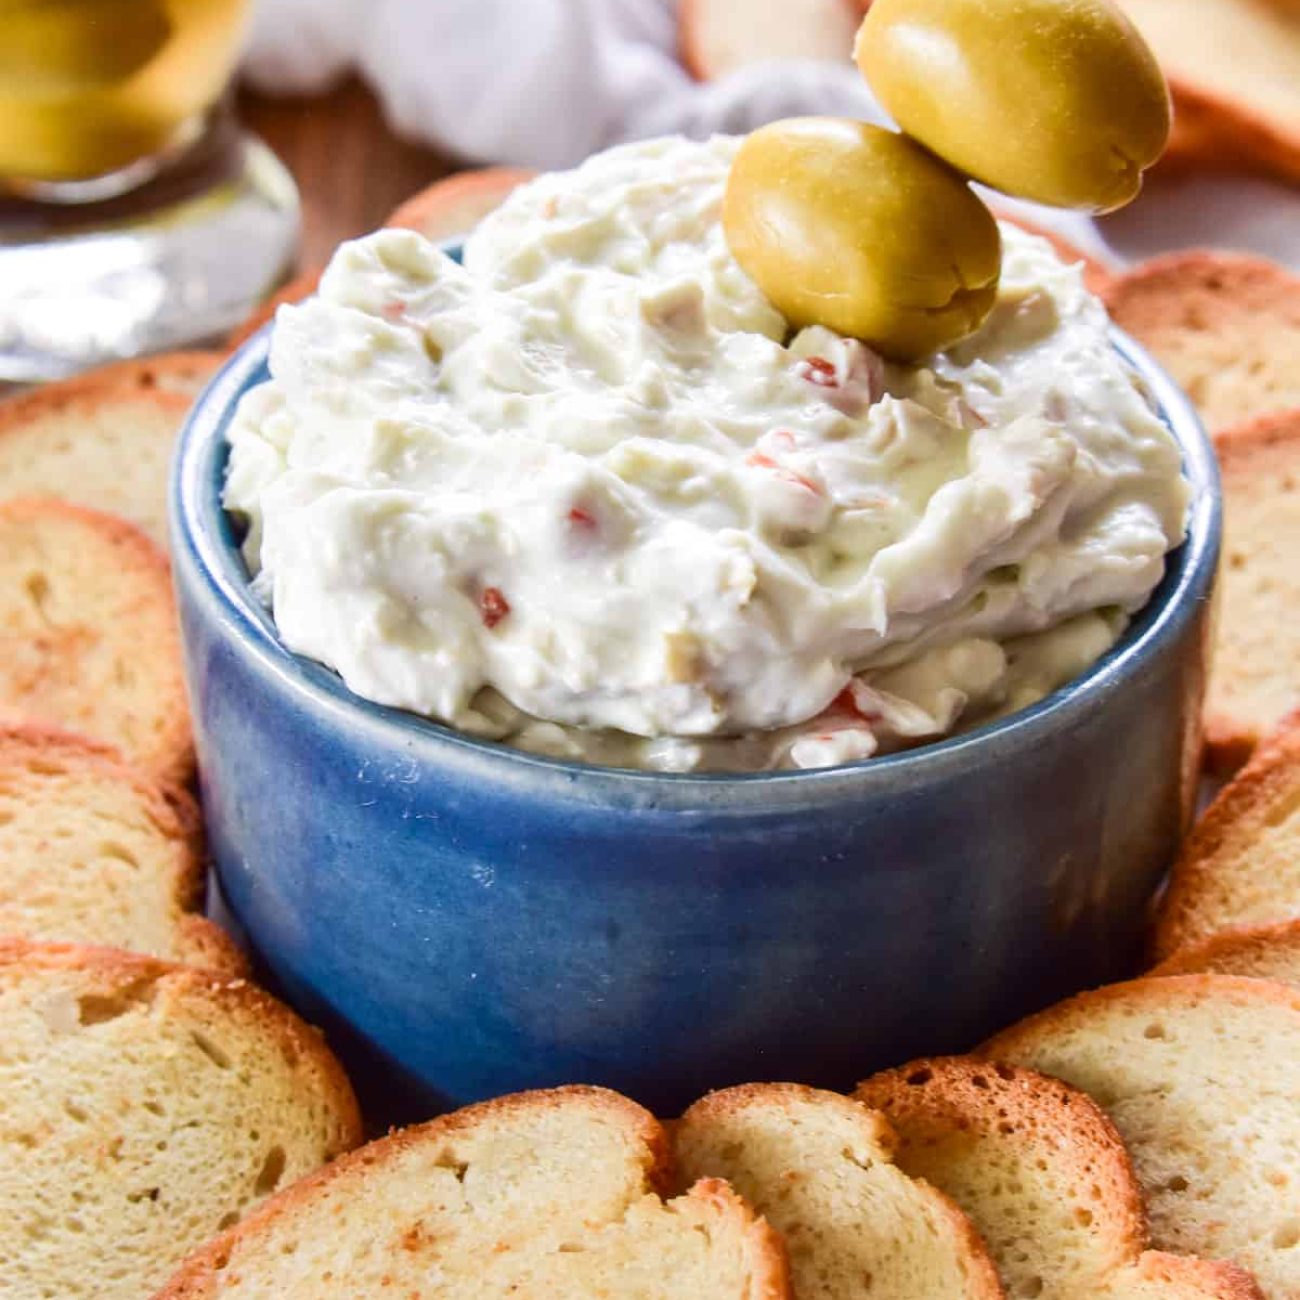 Savory Smoked Bacon and Blue Cheese Dip Recipe